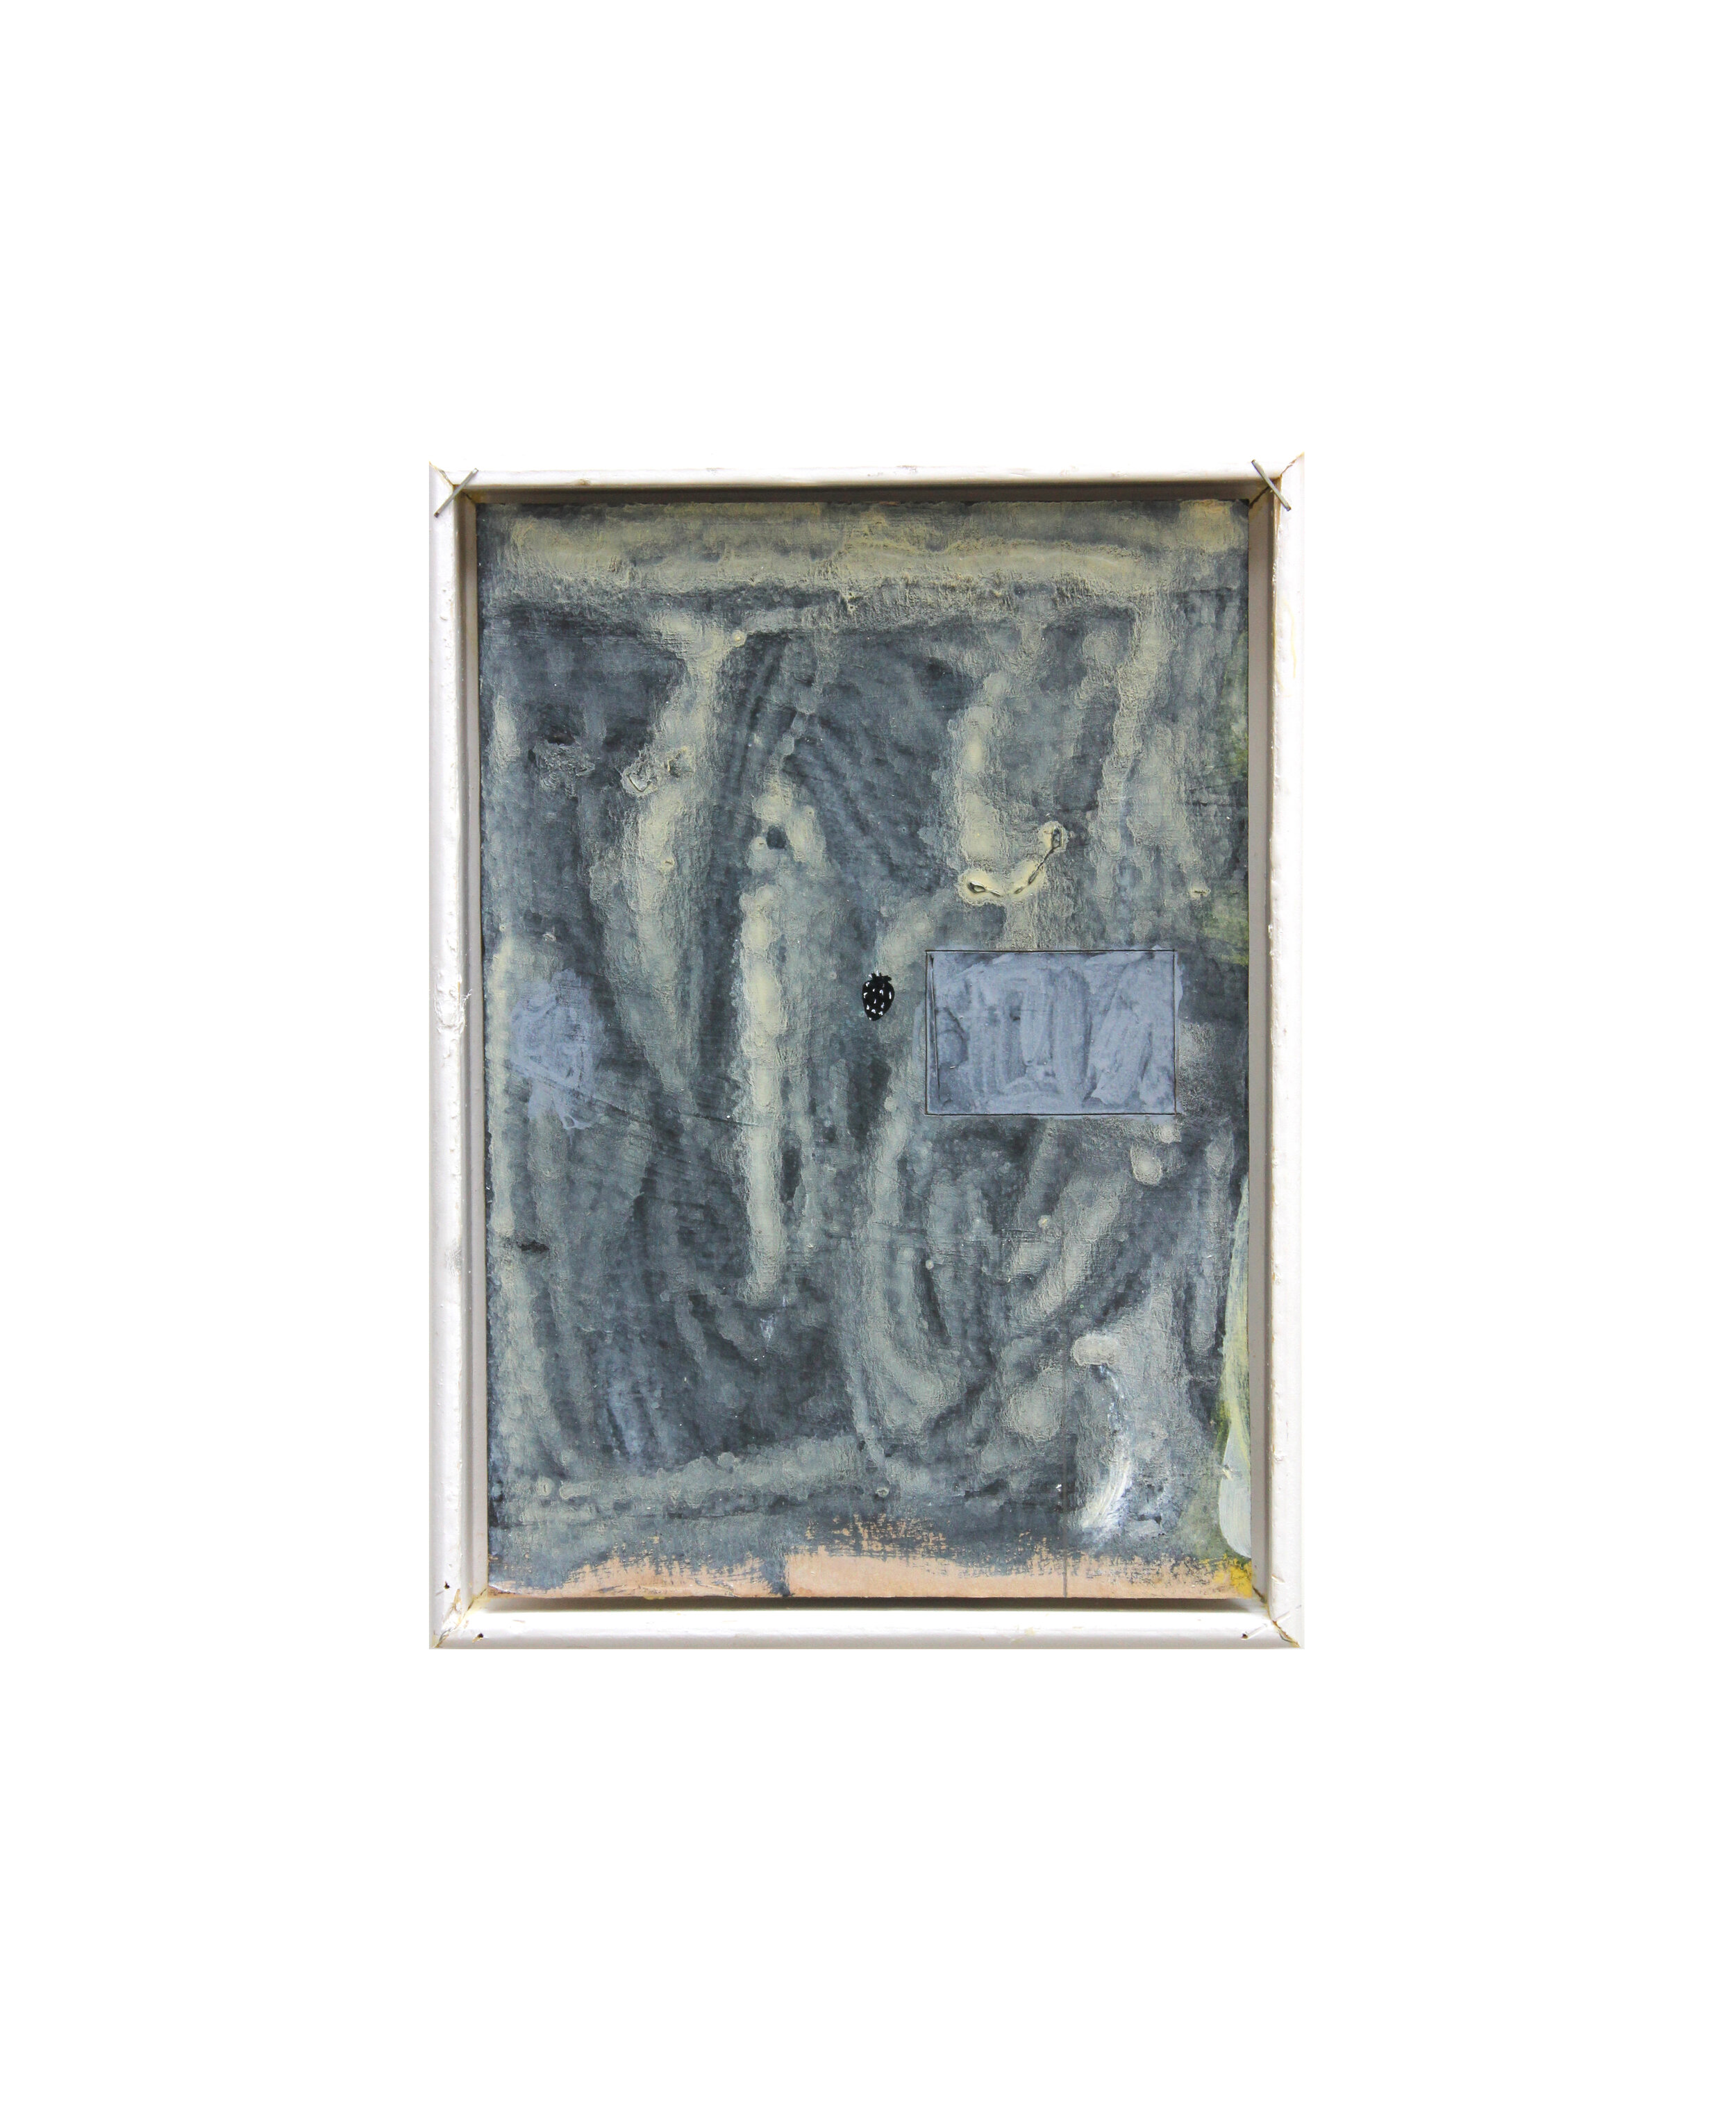 Untitled, 2017, gouache and pencil on board, white artist frame, 8 ½ x 6 ¼ x 1 1/16 inches